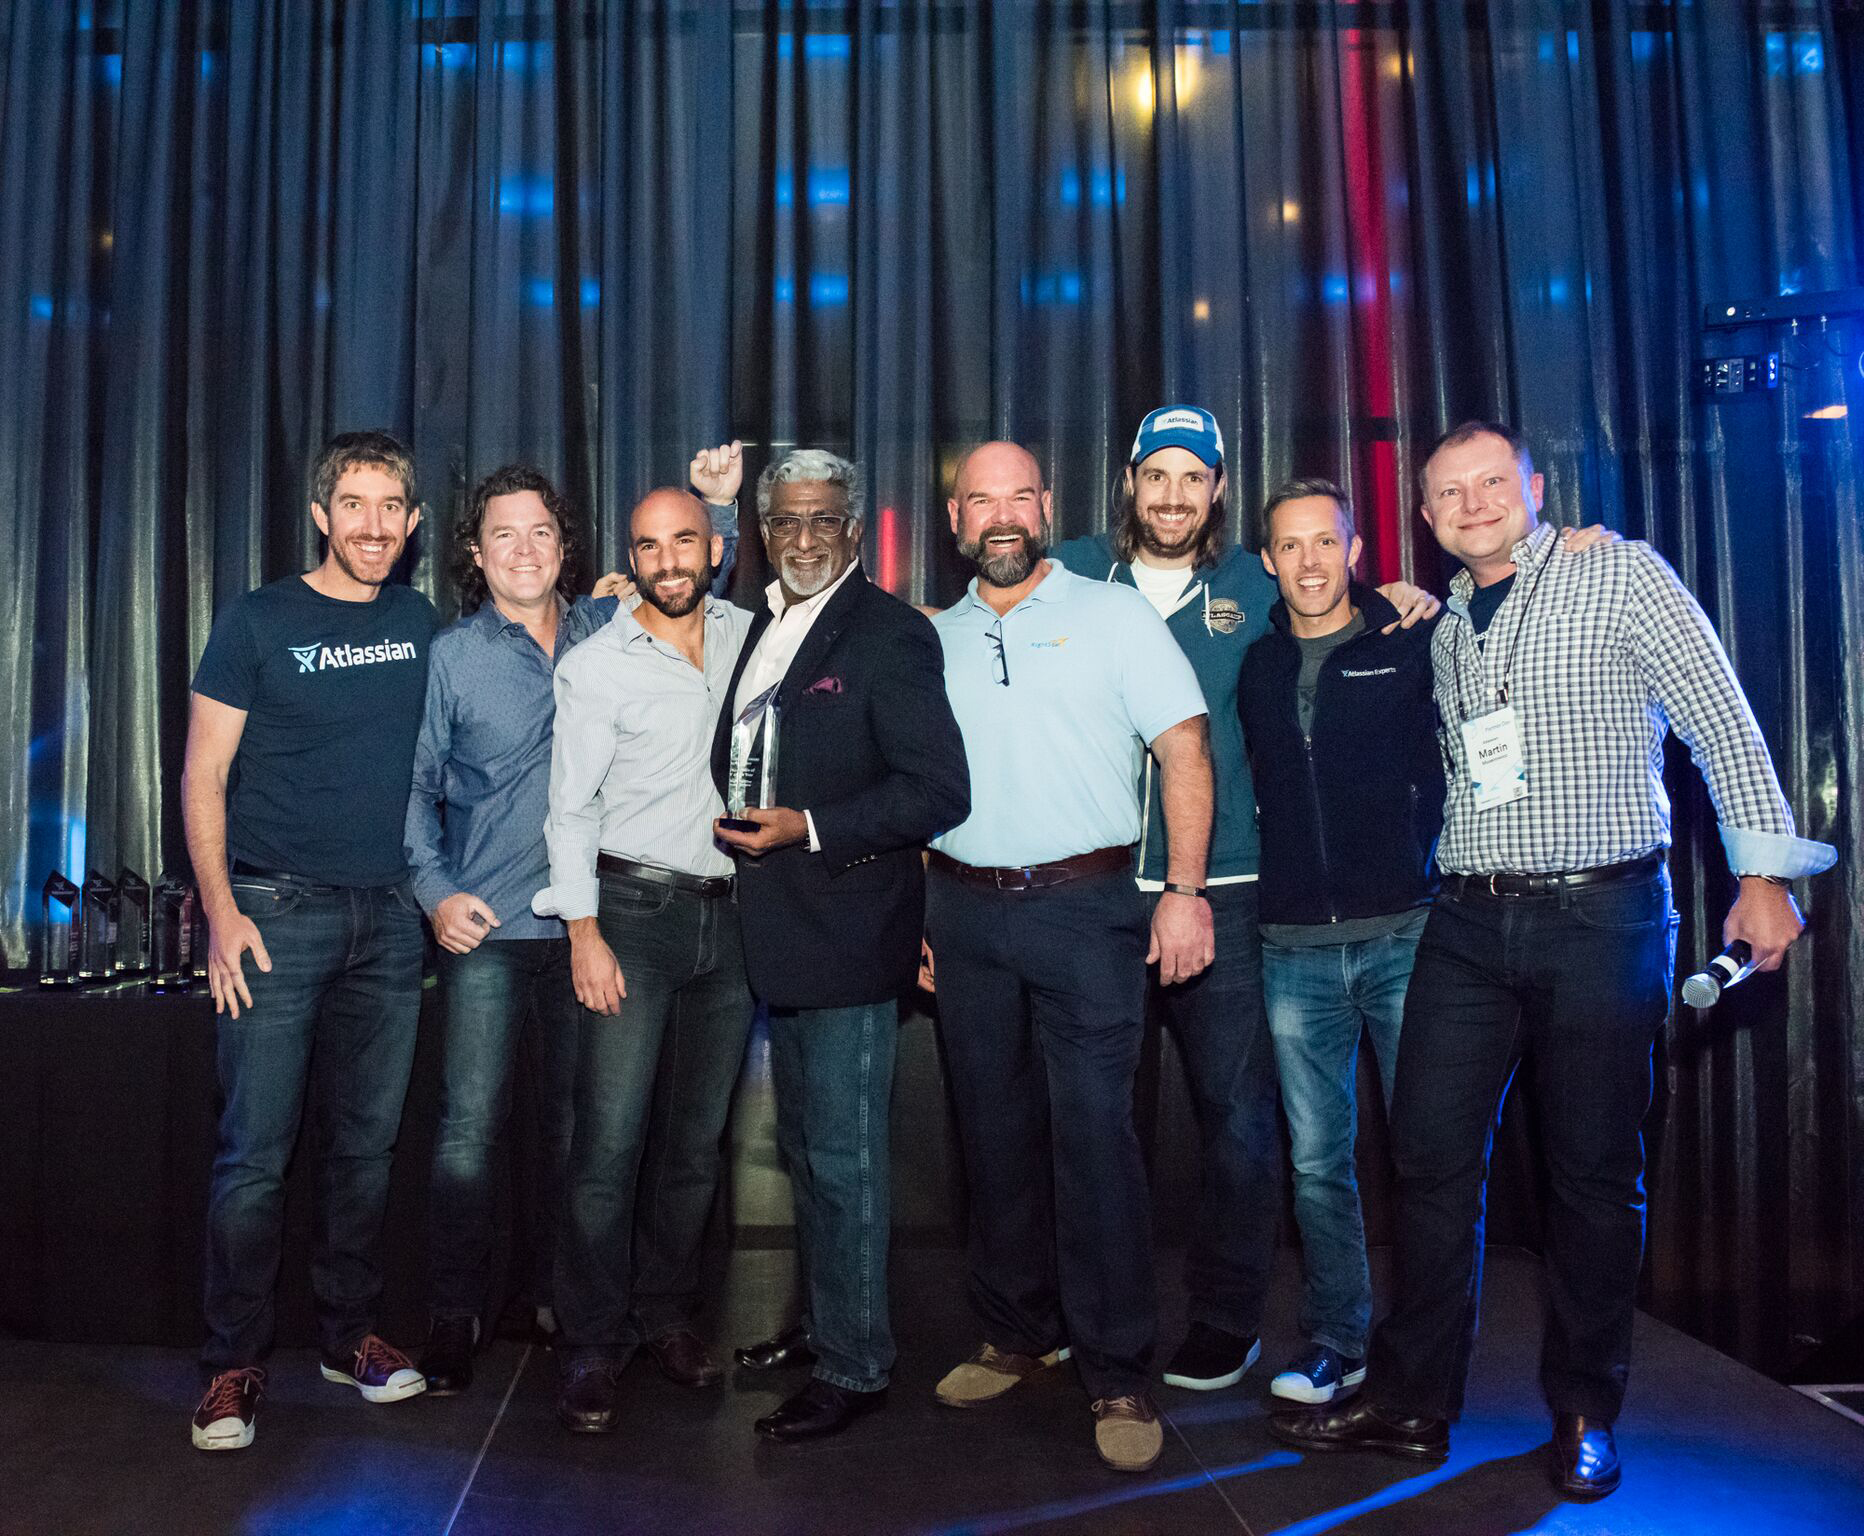 RightStar was presented with "Rookie of the Year" award at Atlassian Summit 2016